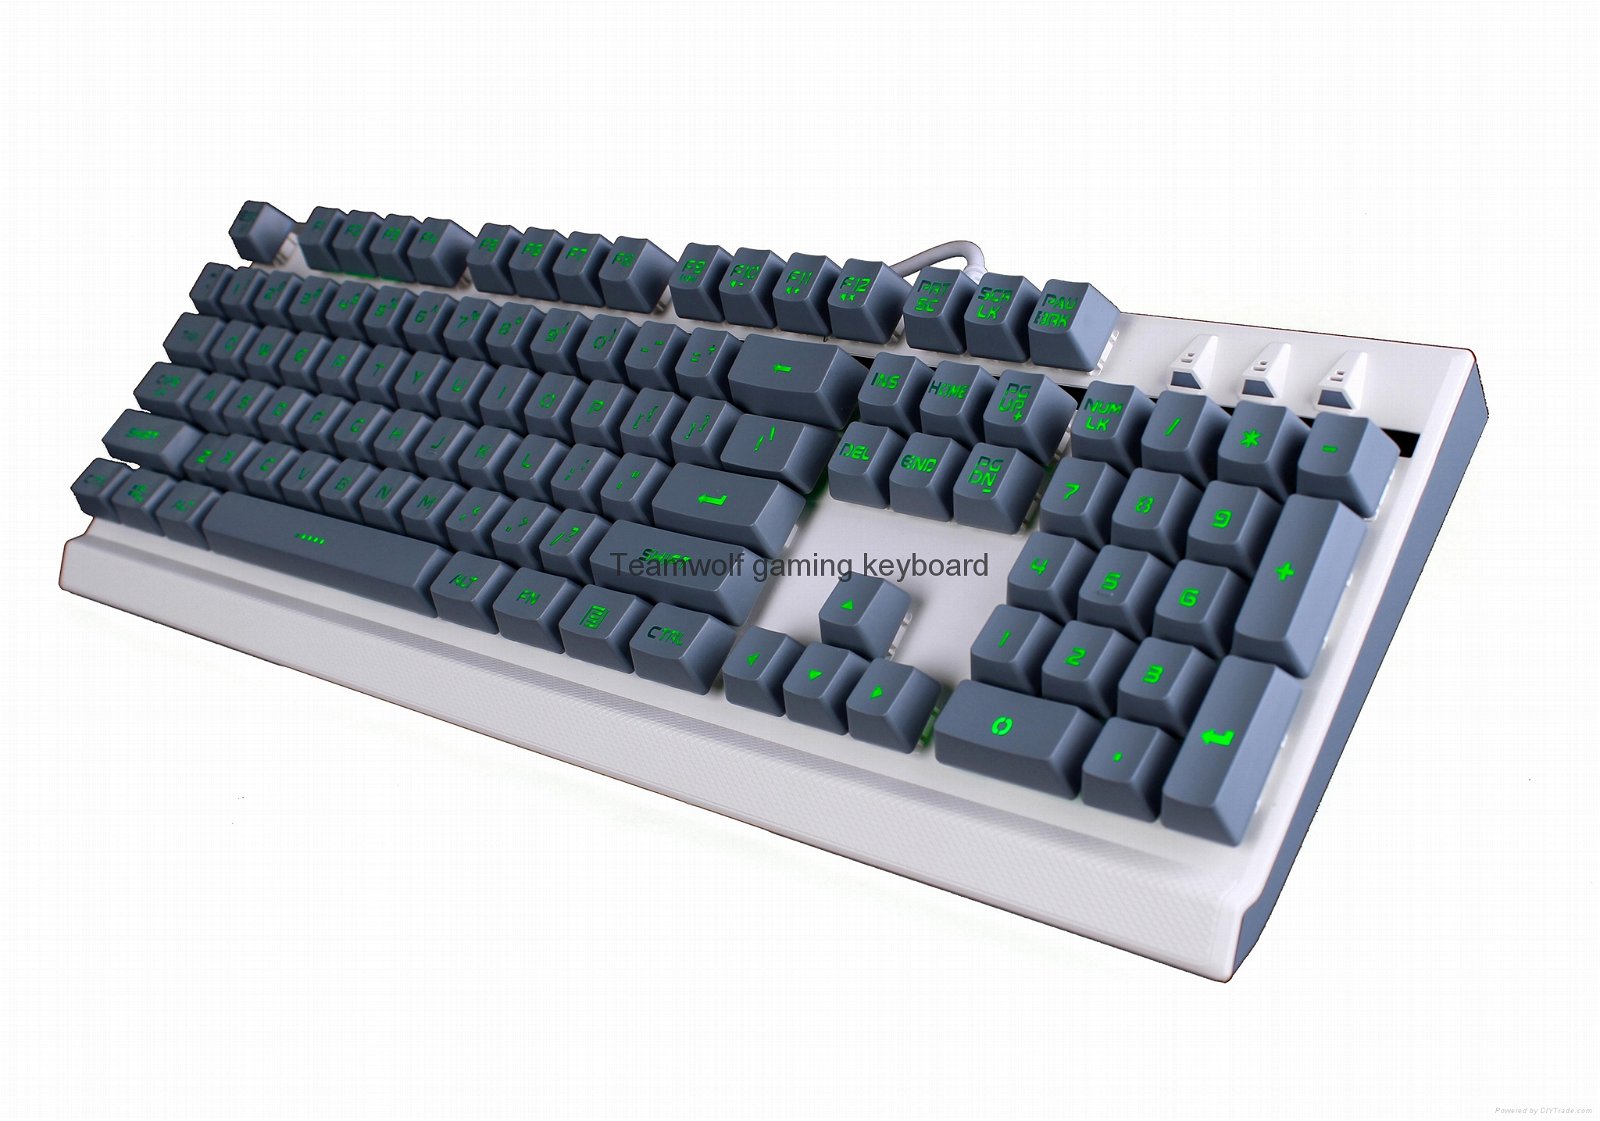 Arbiter-TEAMWOLF wired Membrain gaming keyboard with color Mixed light-G12 3